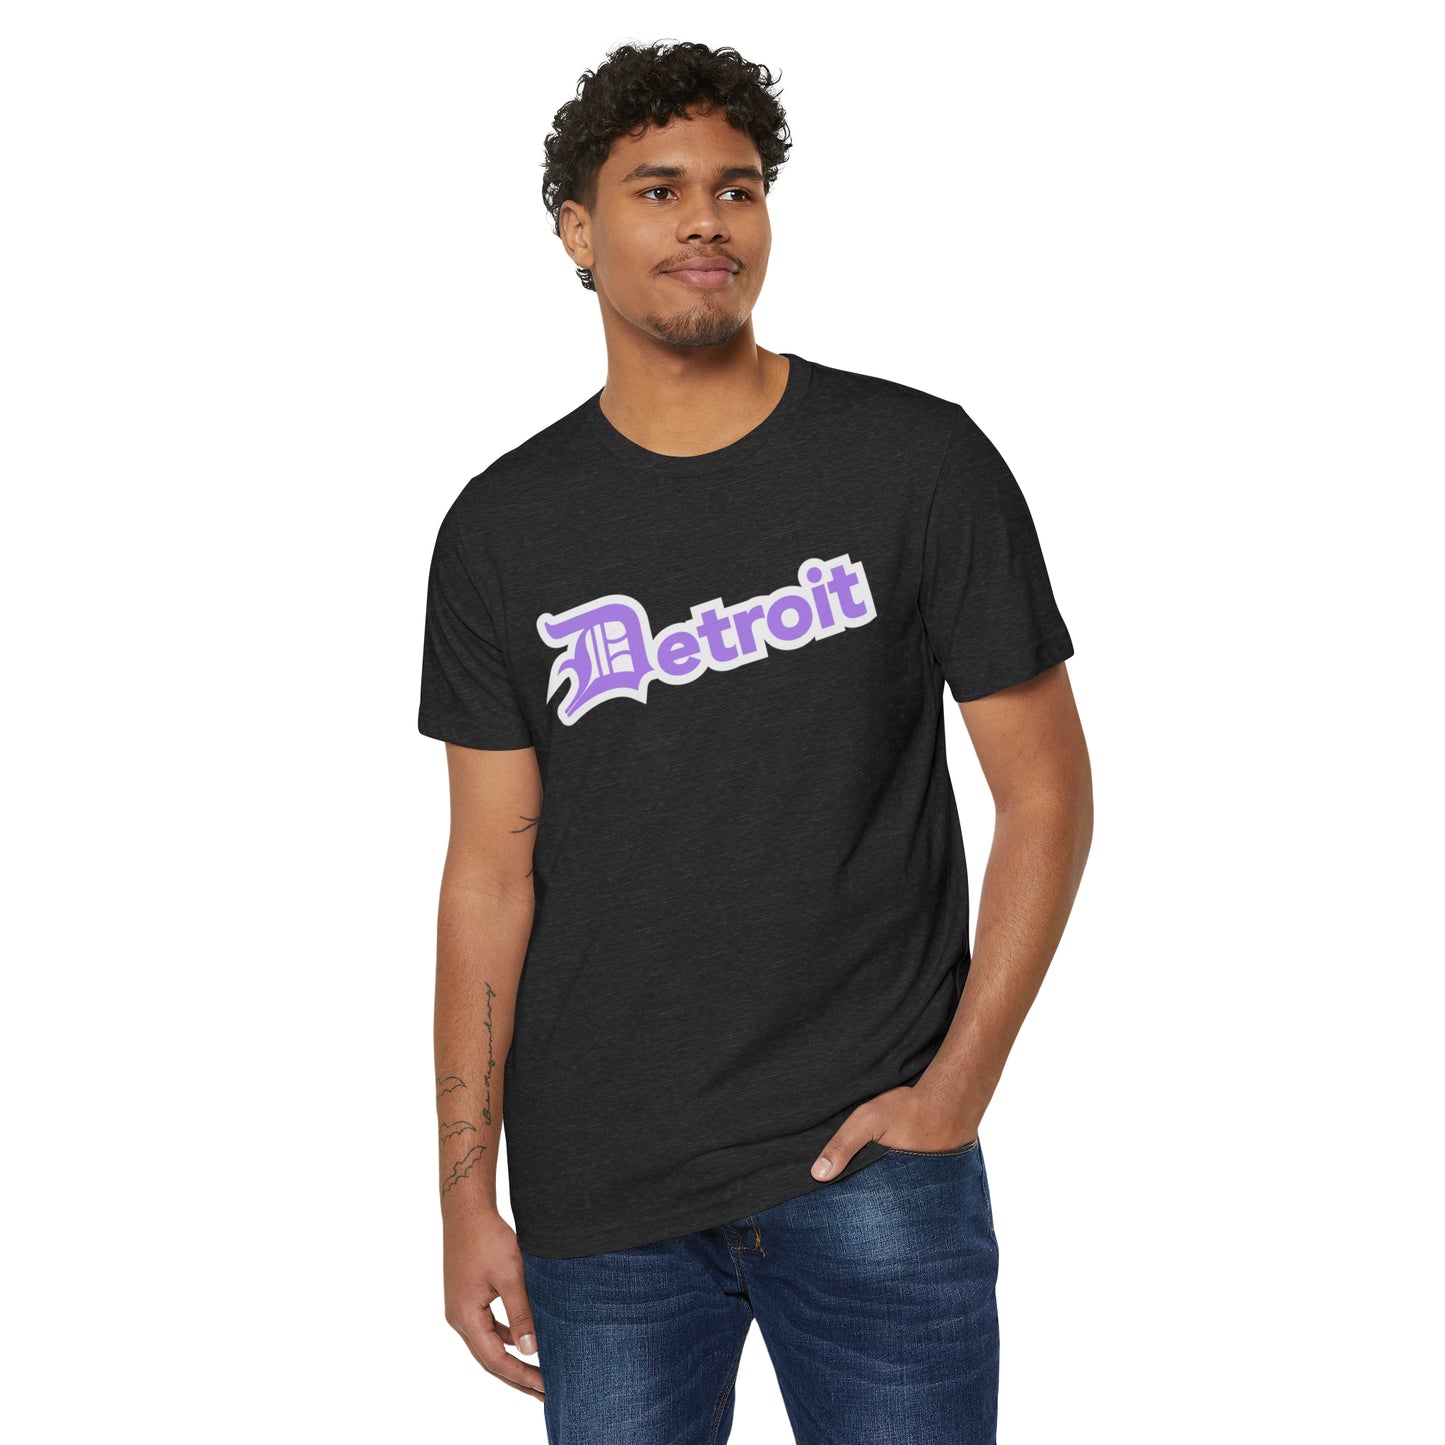 Detroit' T-Shirt (Lavender Old English 'D') | Unisex Recycled Organic